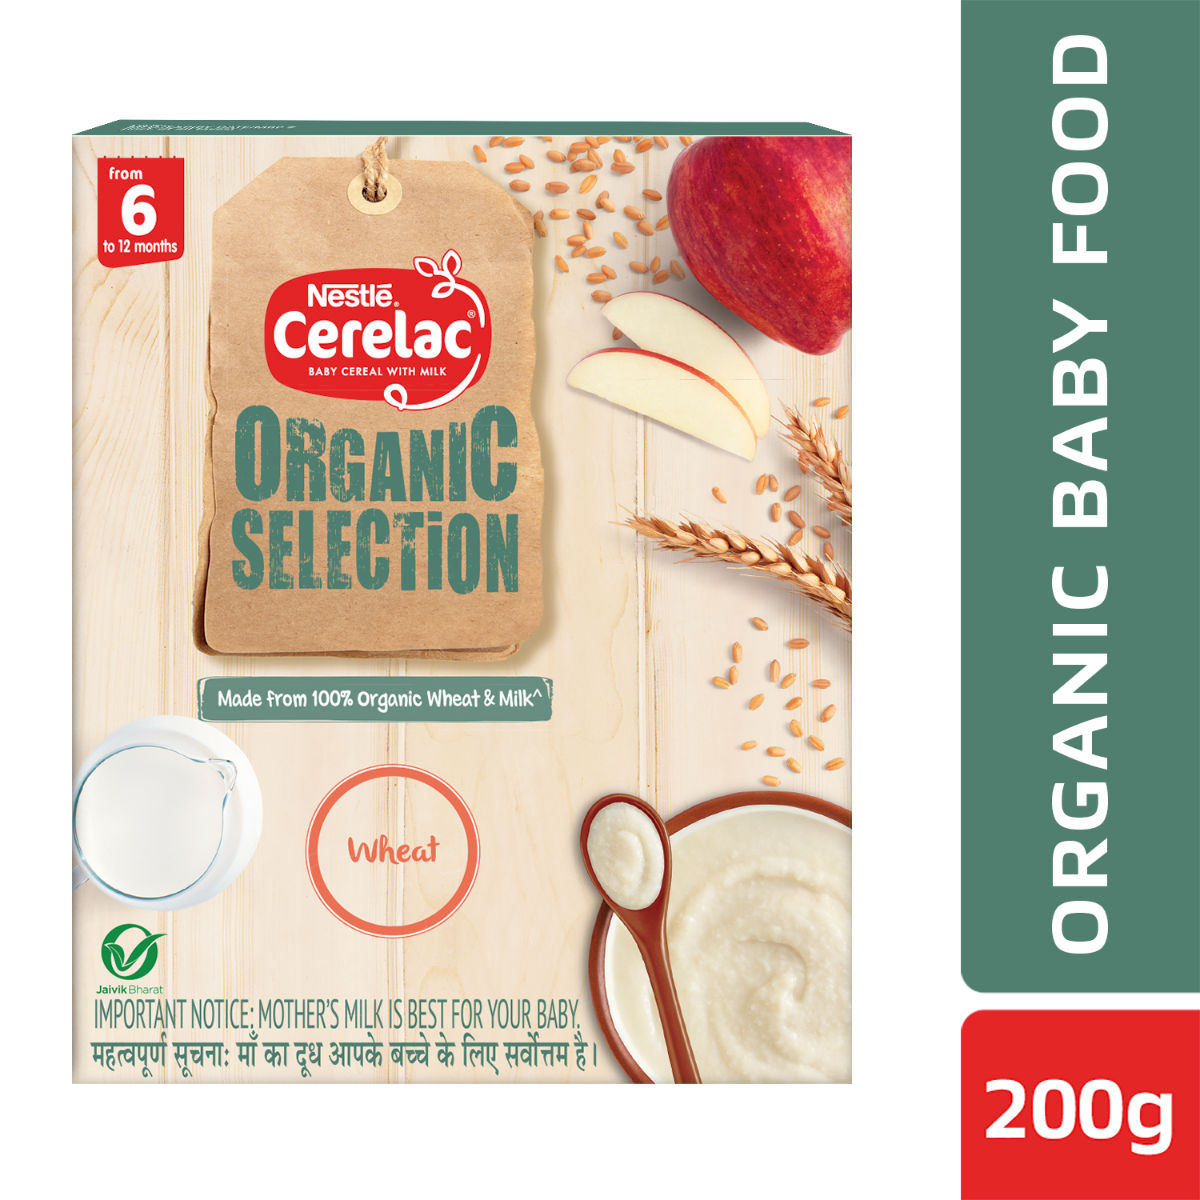 Buy Nestle Cerelac Baby Cereal With Milk Organic Selection Wheat, 6 to 12 months, 200 gm Refill Pack Online